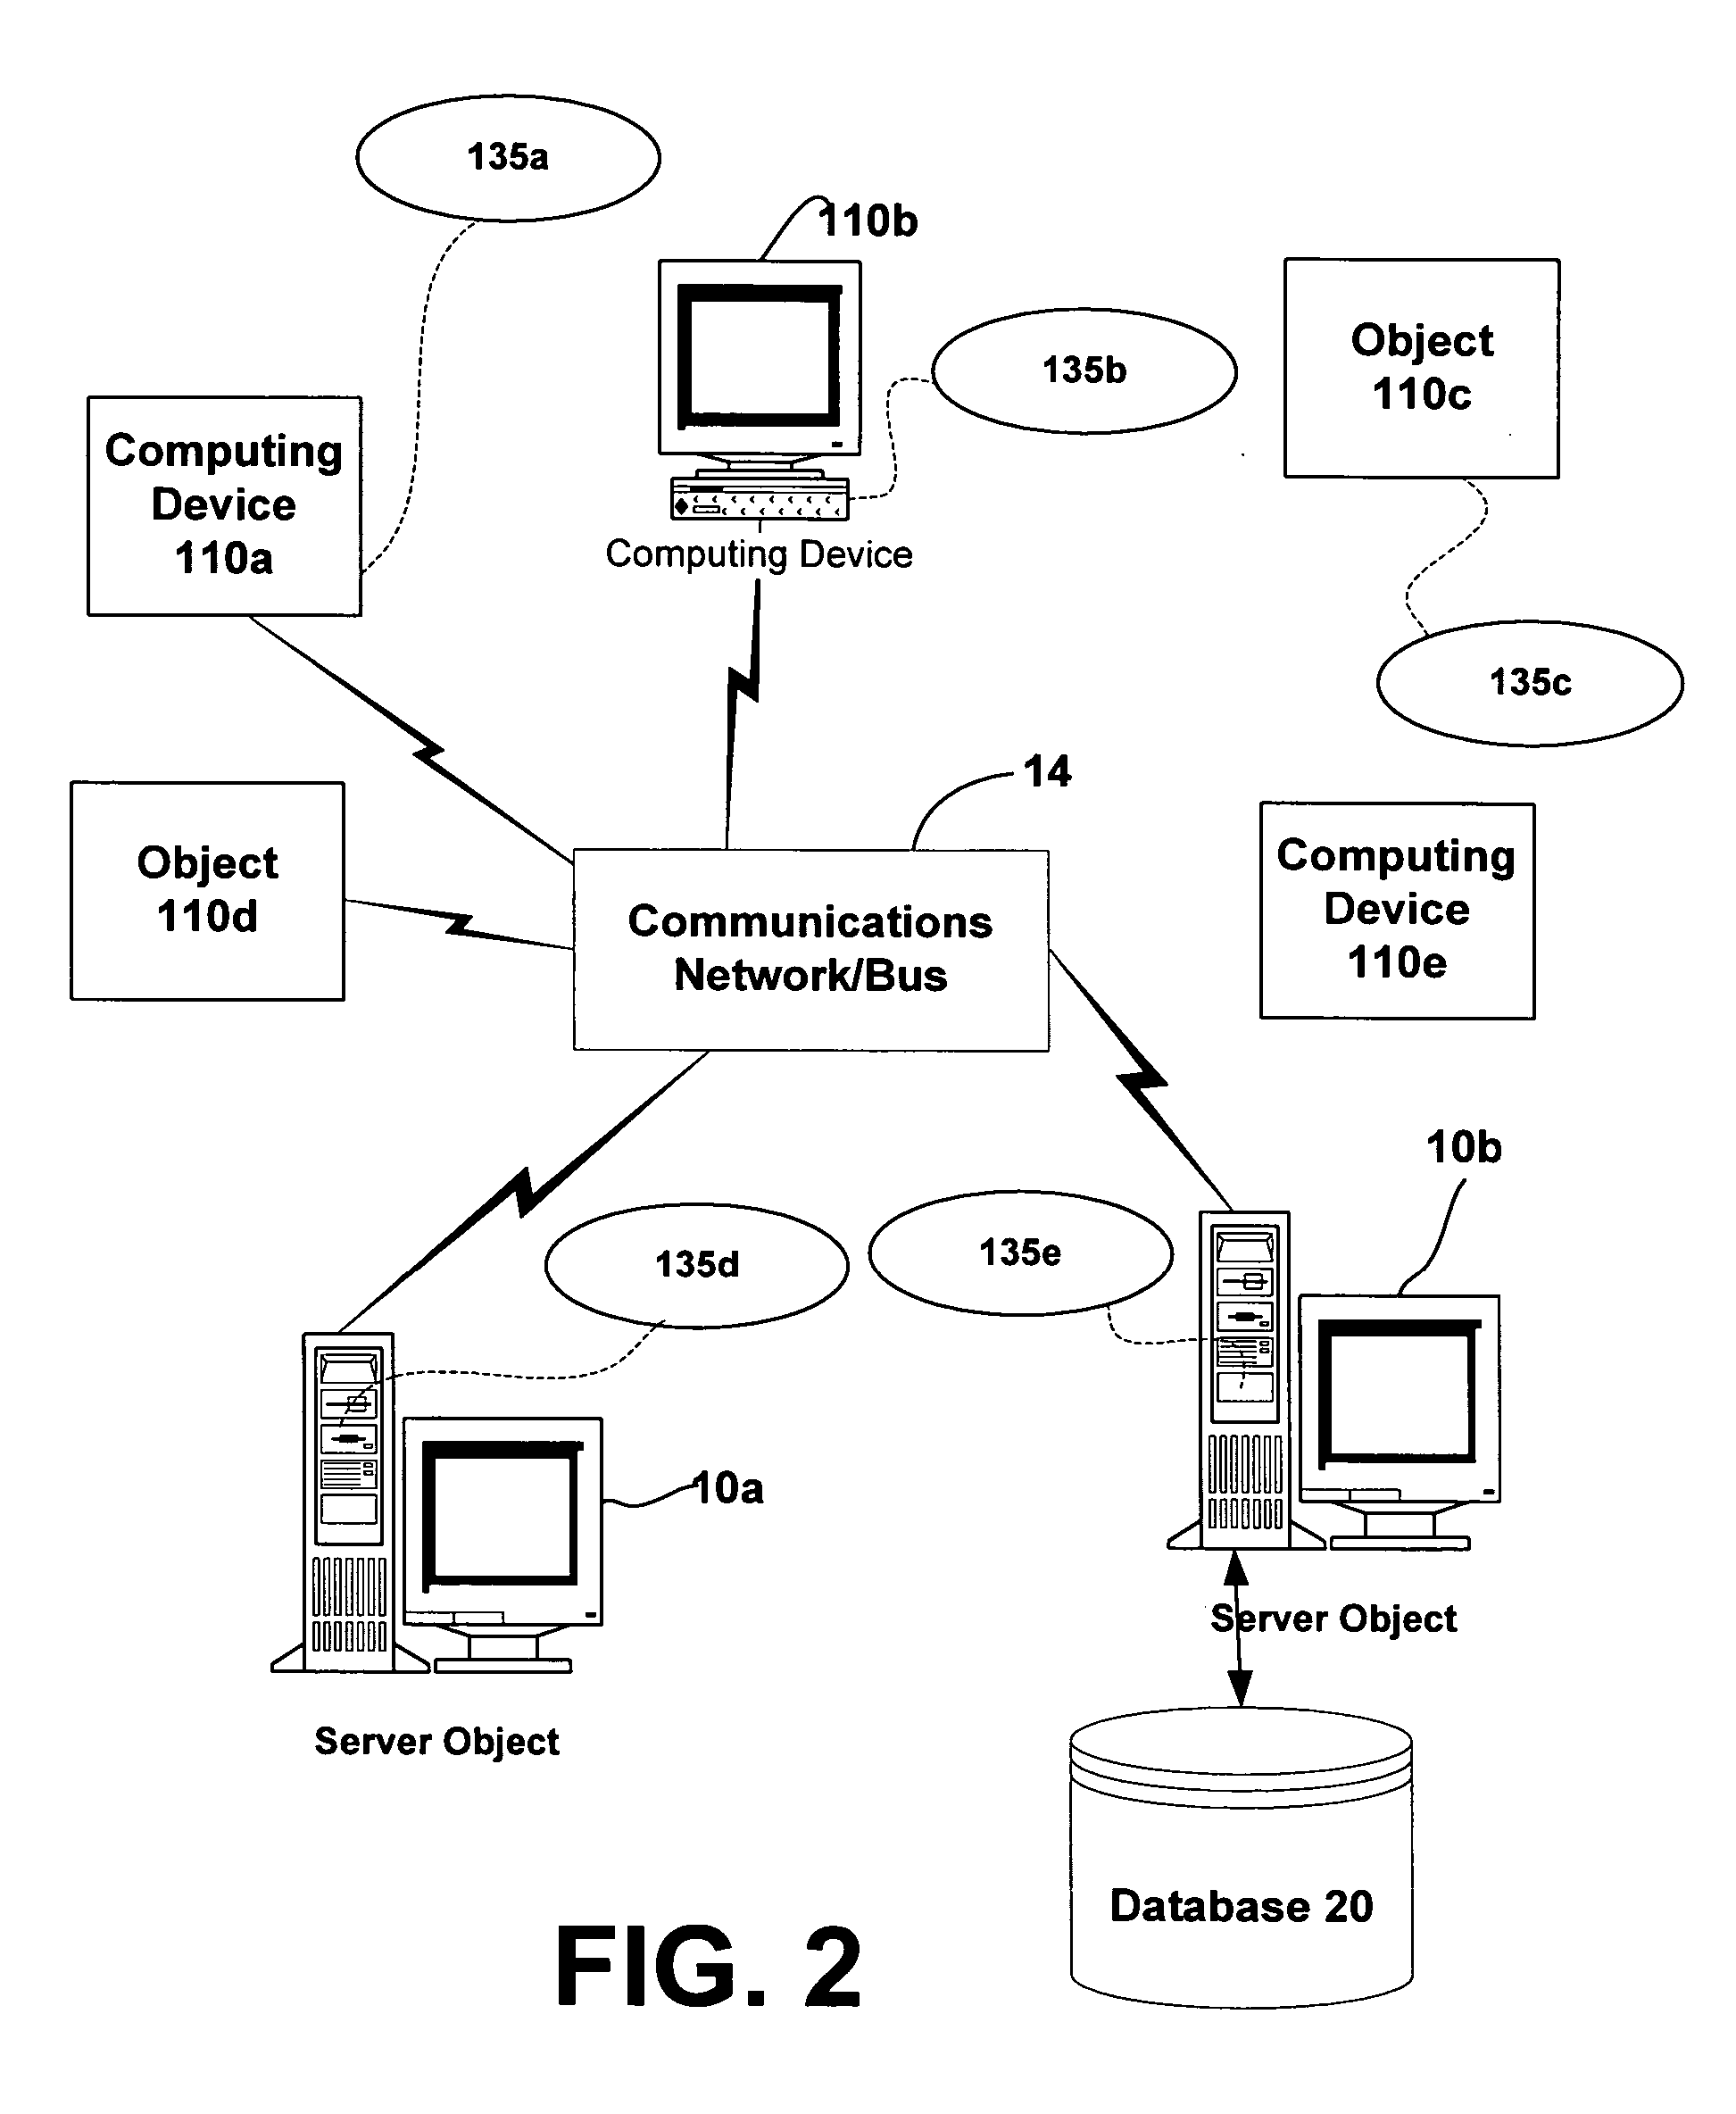 Migrating a virtual machine that owns a resource such as a hardware device